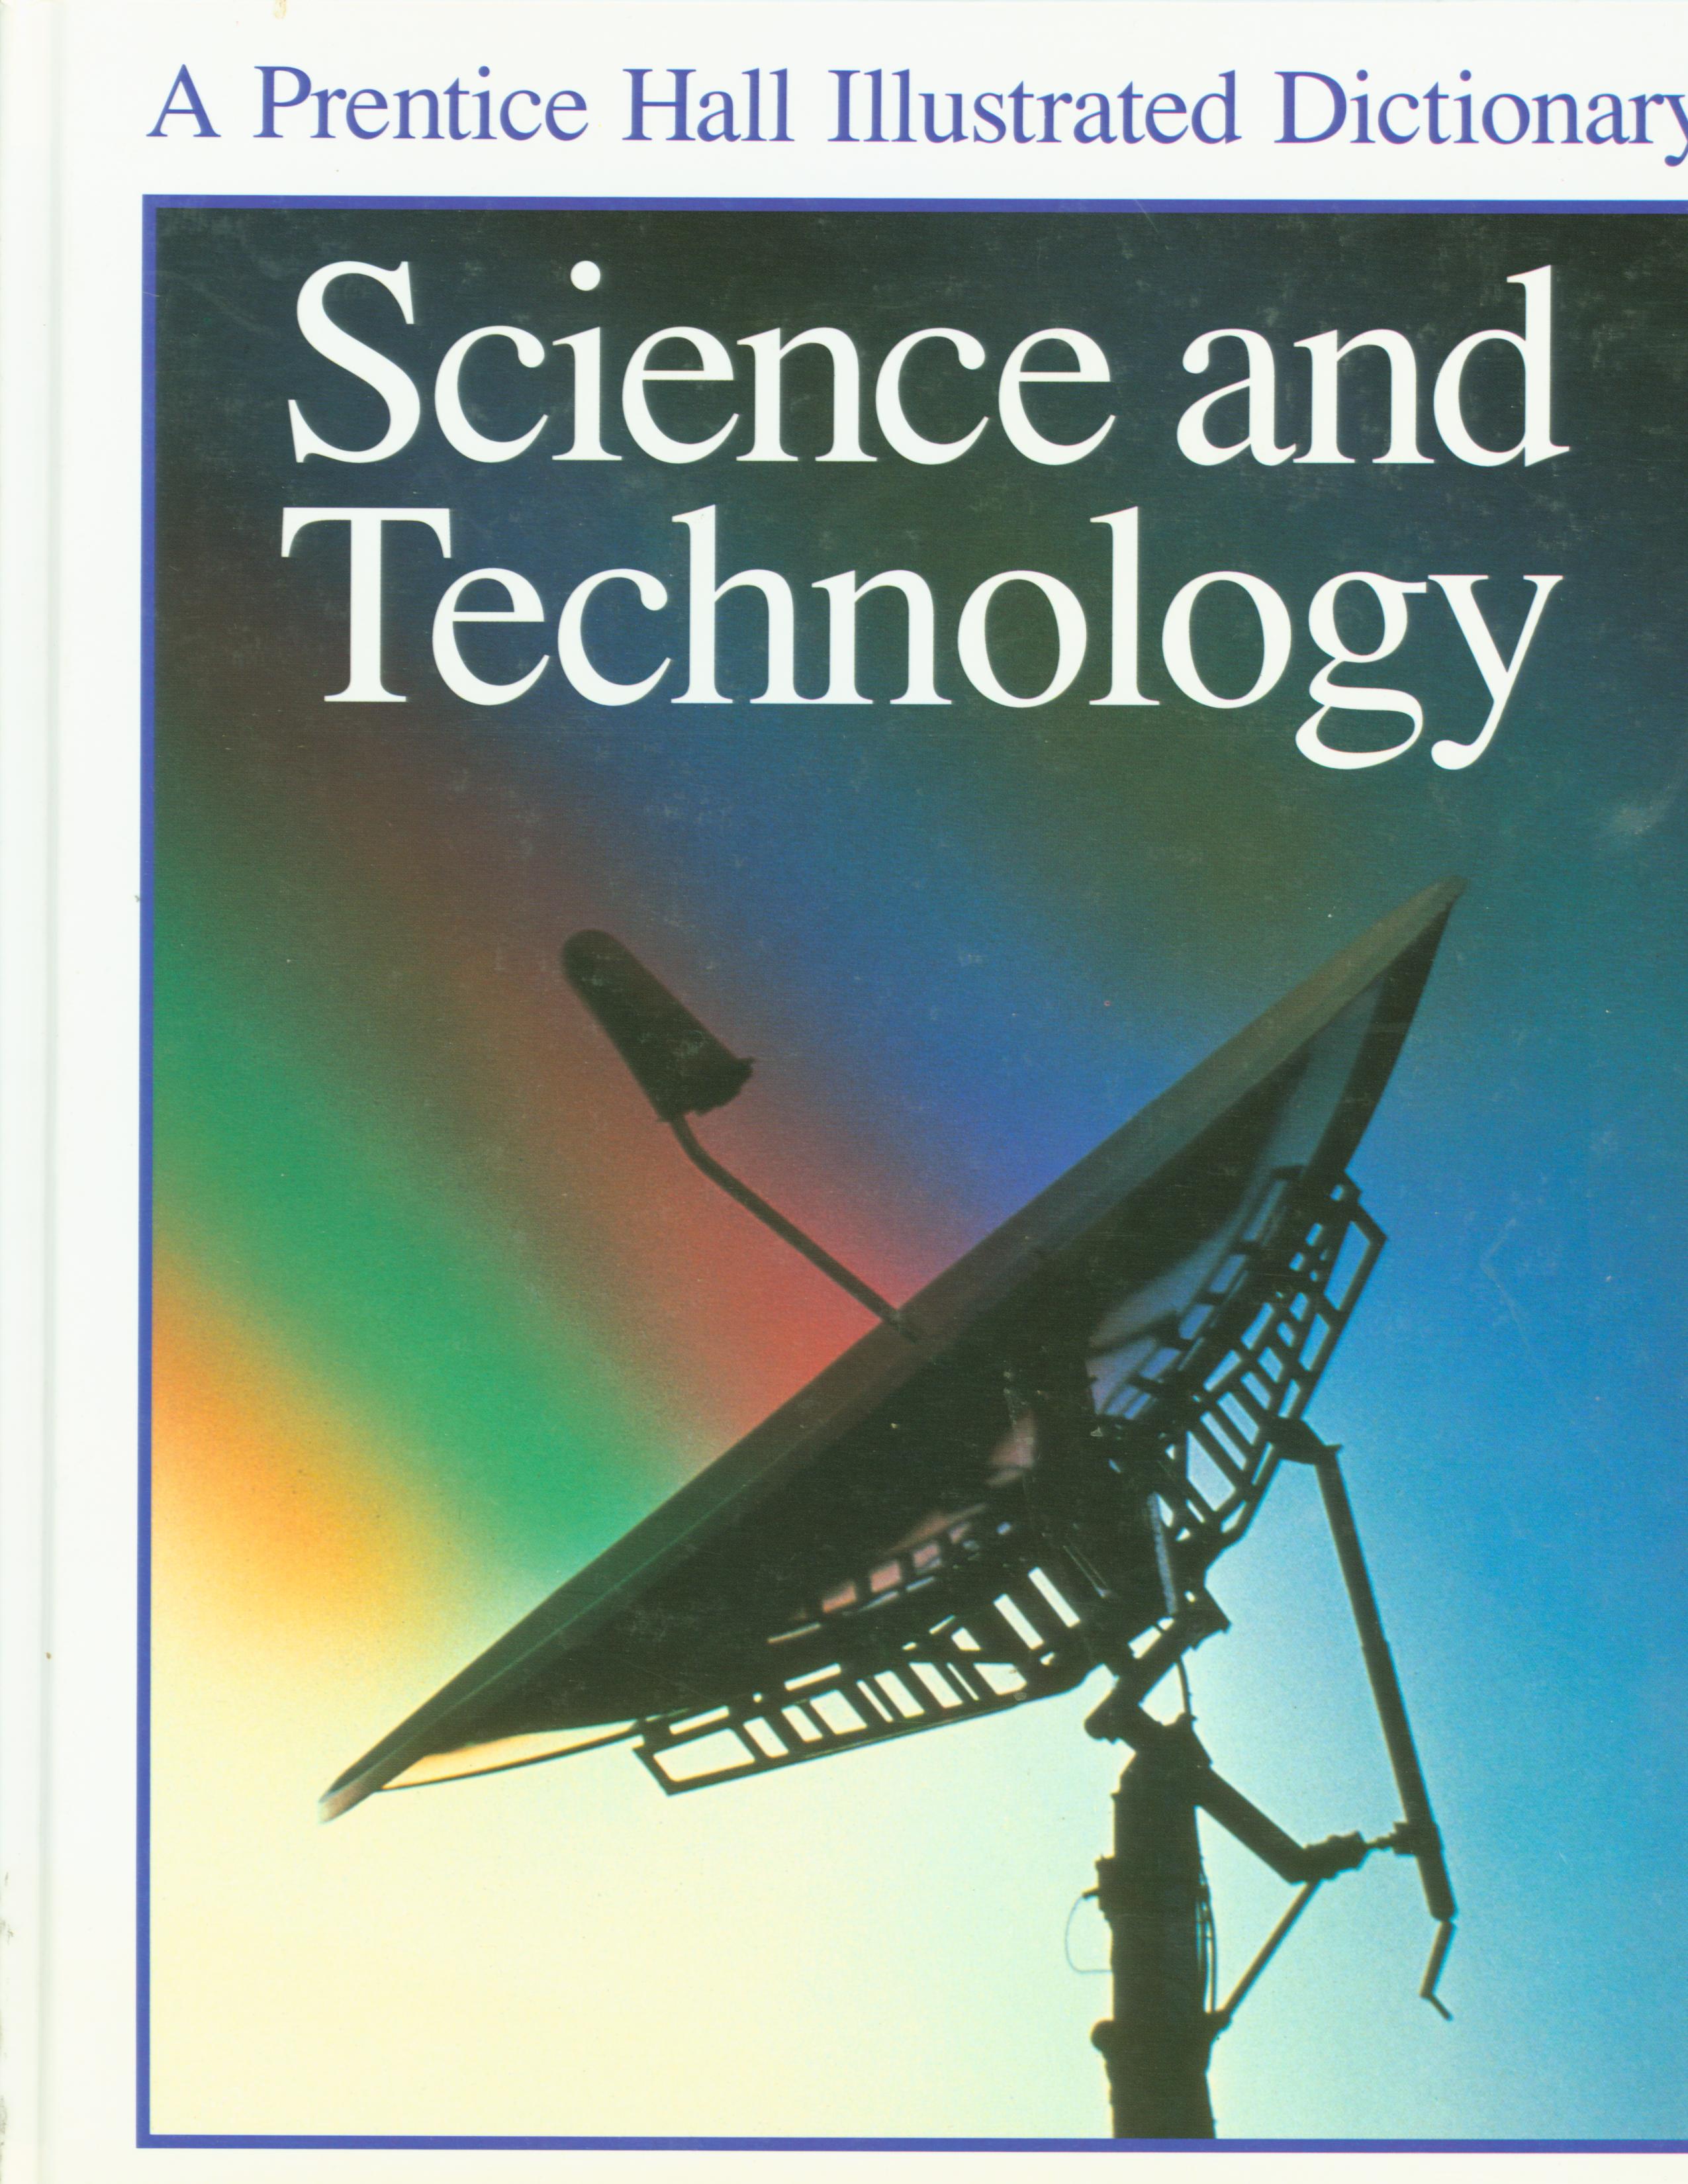 SCIENCE AND TECHNOLOGY: A Prentice Hall Illustrated Dictionary. 